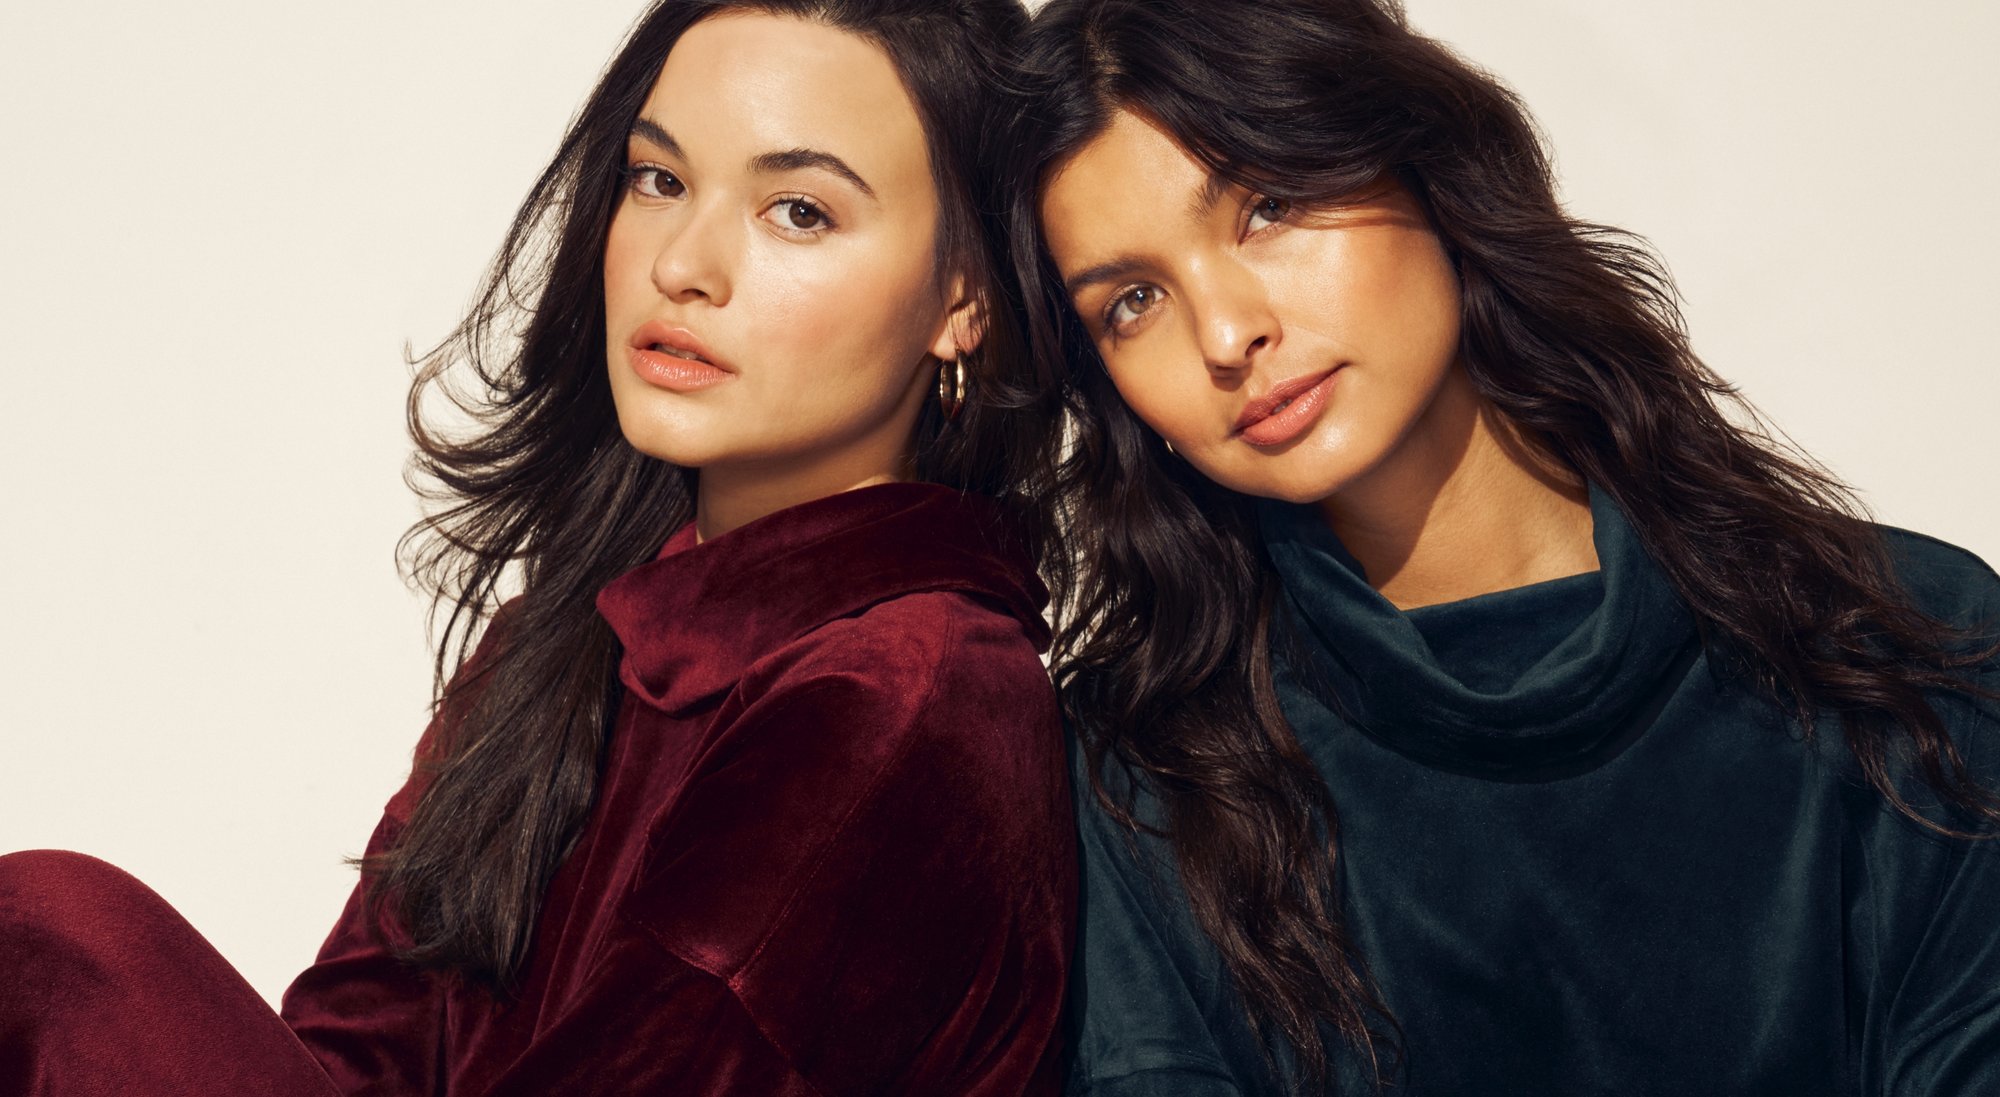 2 Anne Klein models leaning on each other wearing velour matching sets